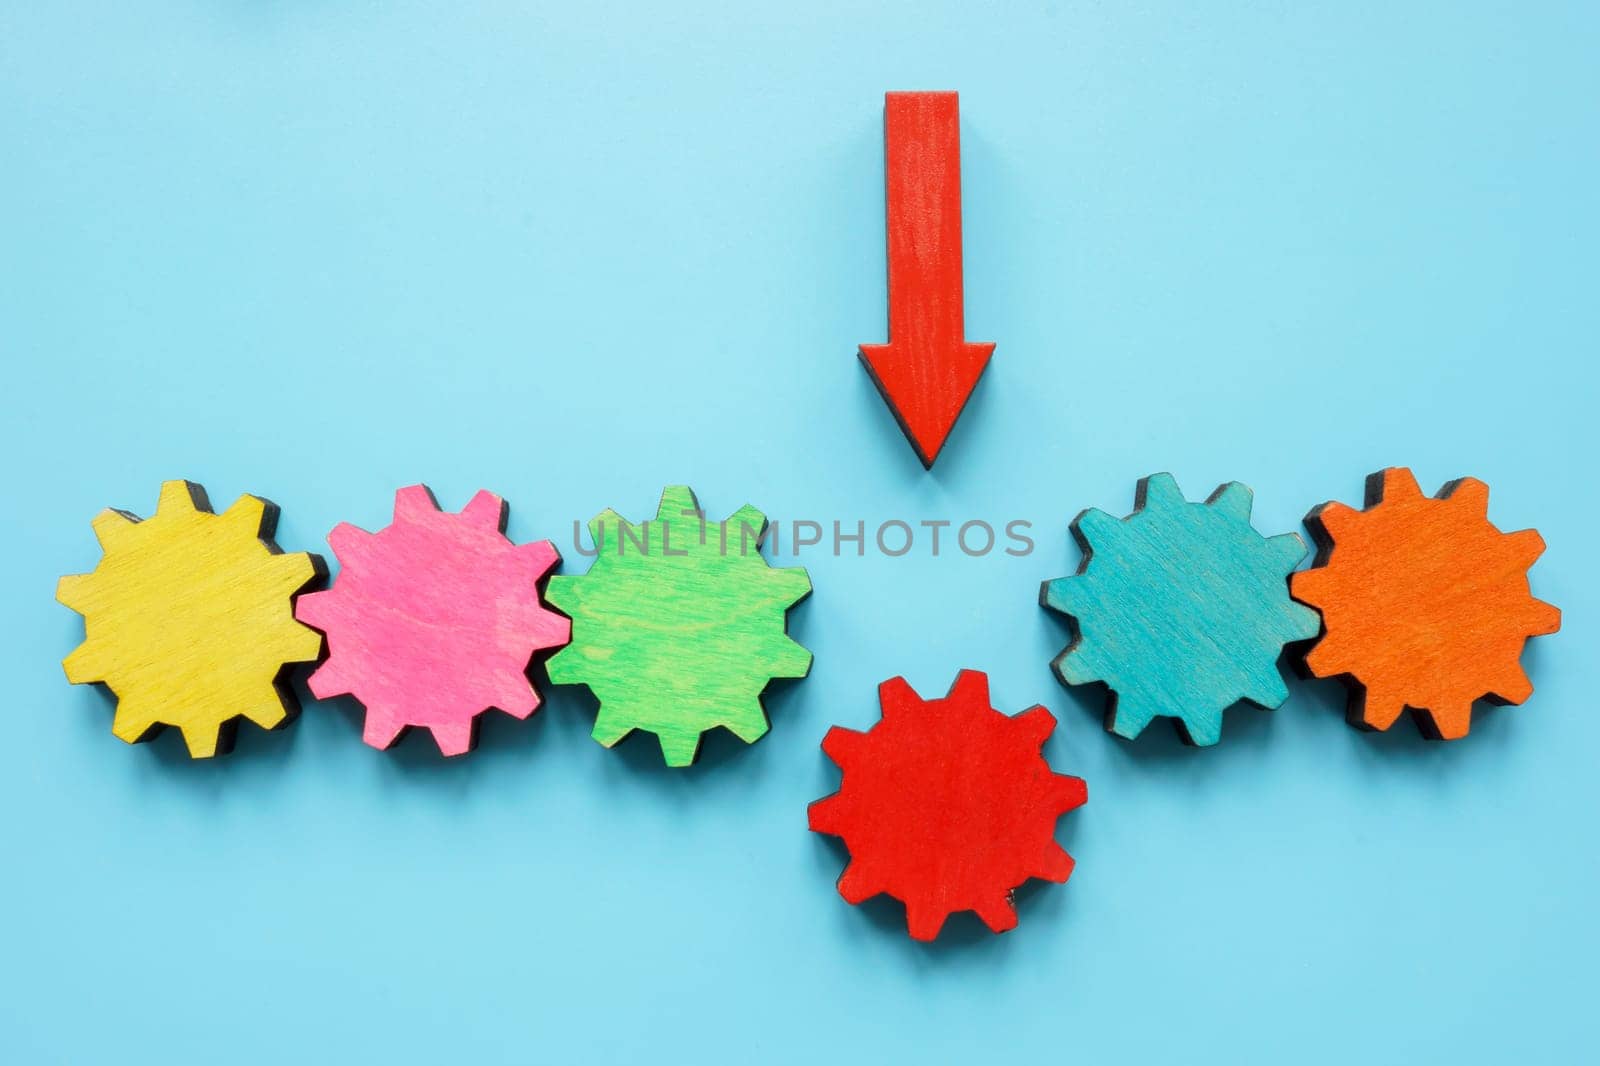 Colored gears as a symbol of teamwork and the weak link. by designer491